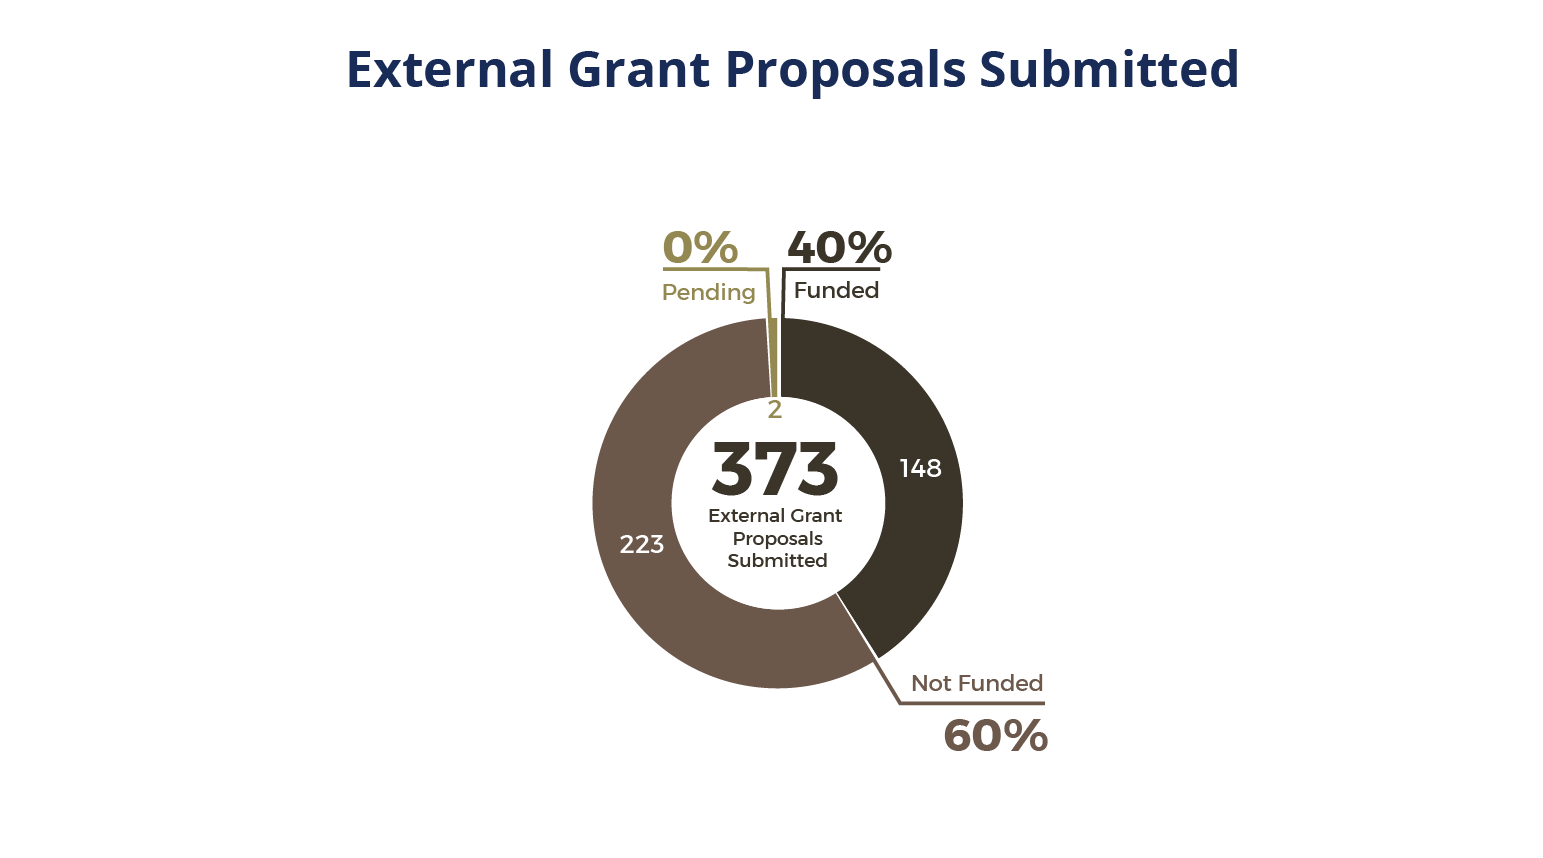 Pie chart of External Grant Proposals Submitted.